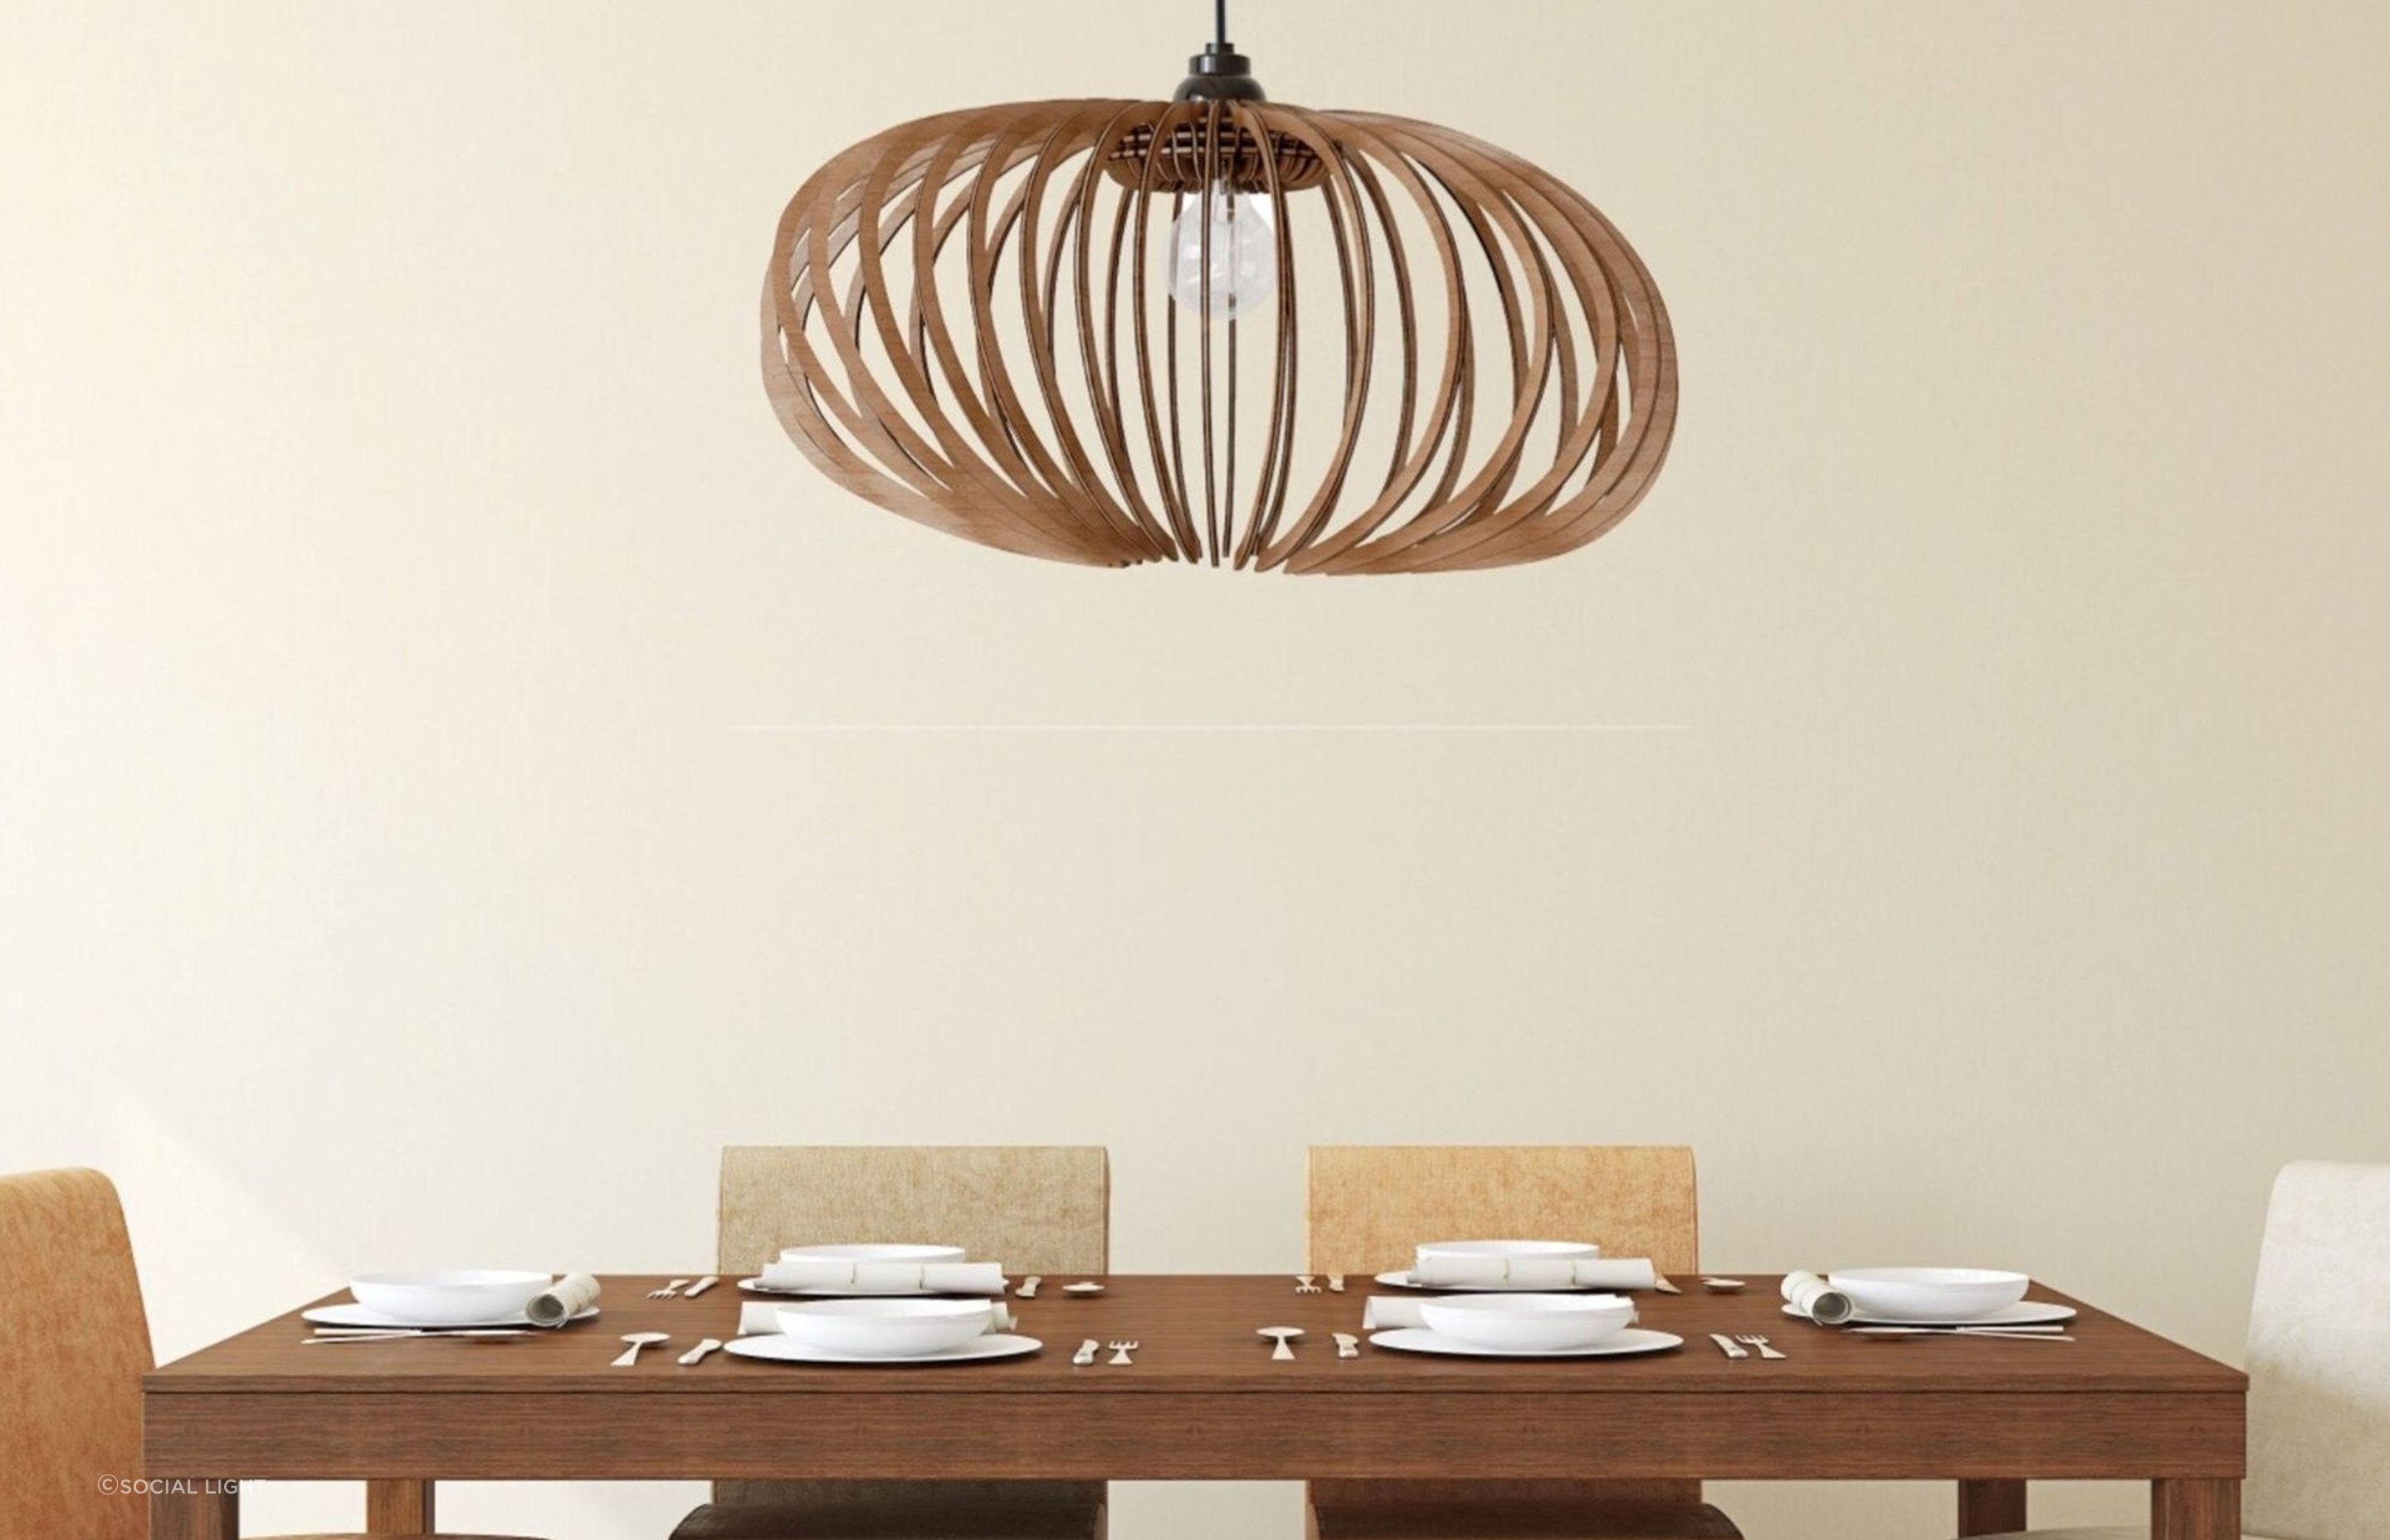 A distinctive choice, like the Wobble Pendant Light, can add intrigue and interest to the lighting design of your dining room.